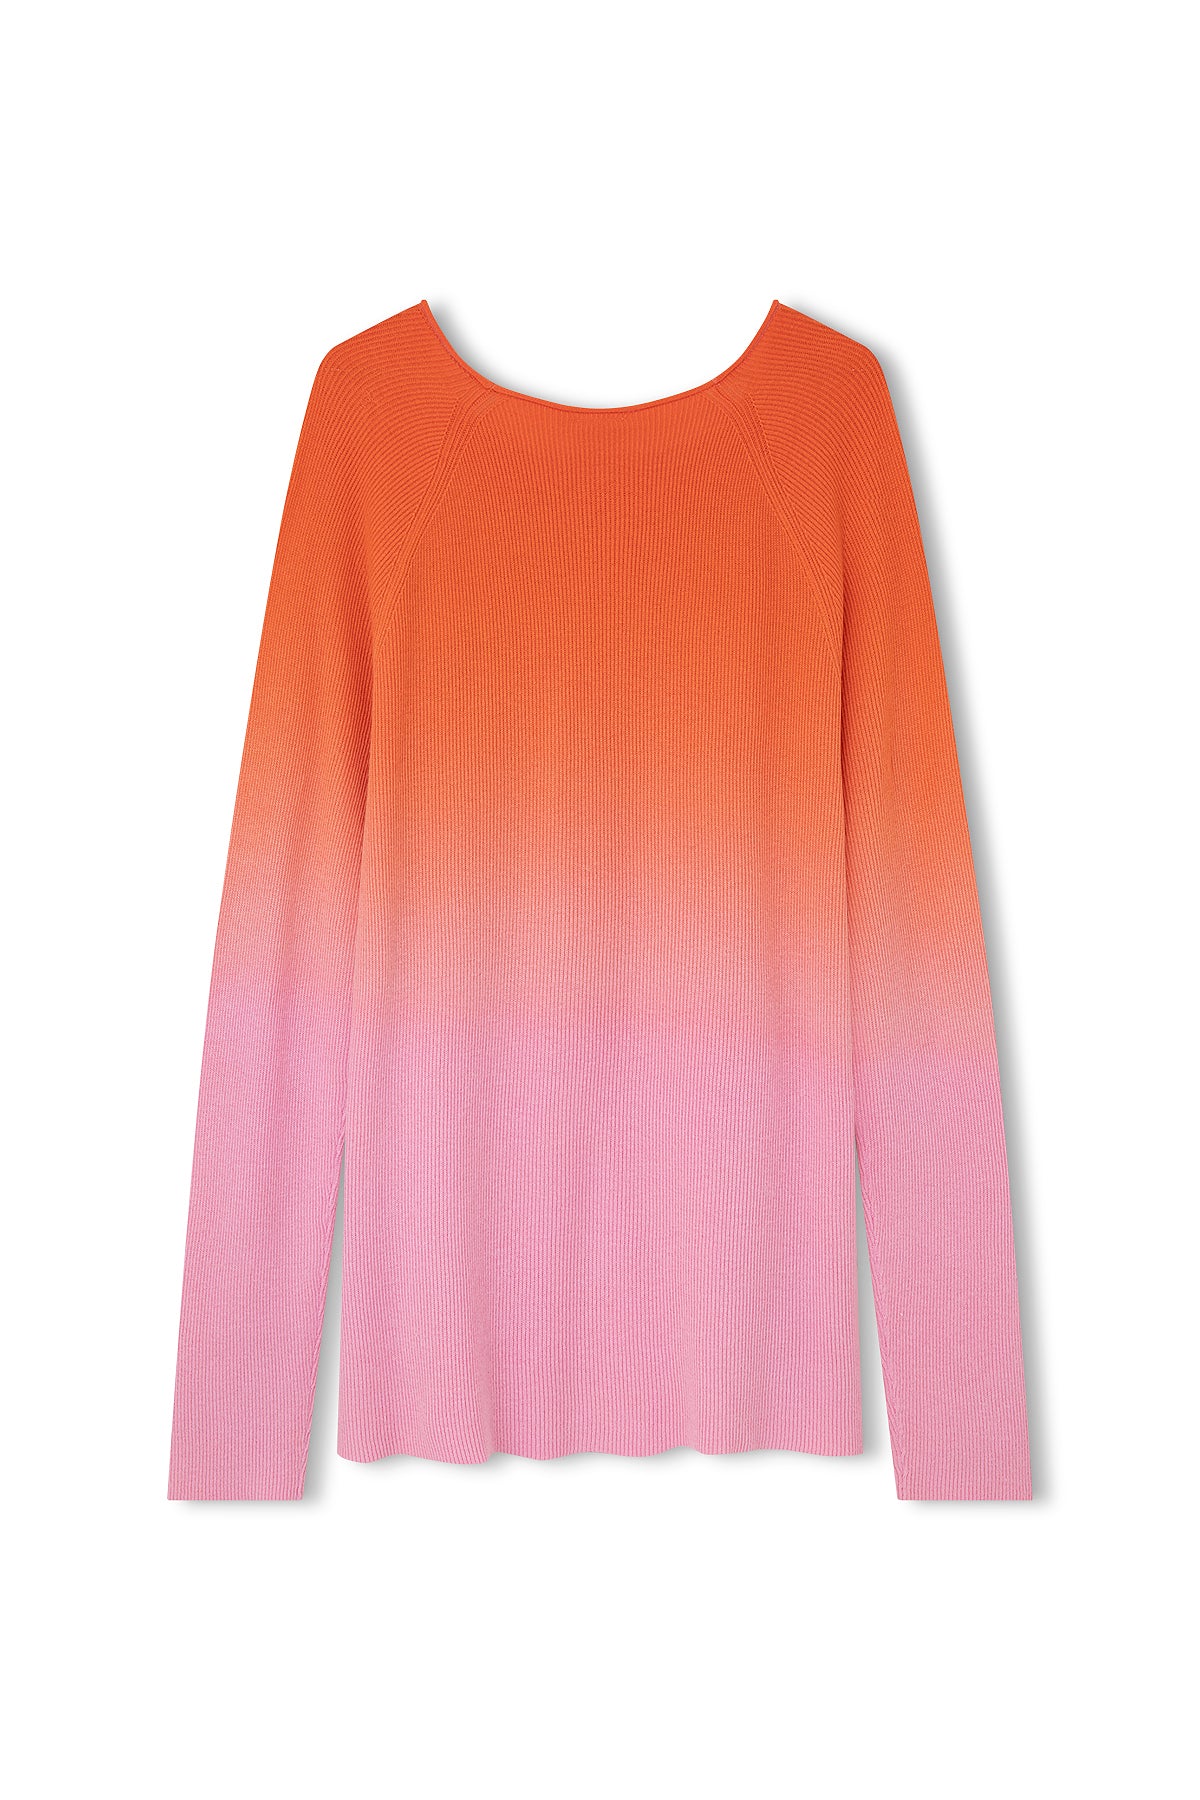 MERINO BLEND KNIT TOP | PINK OMBRE